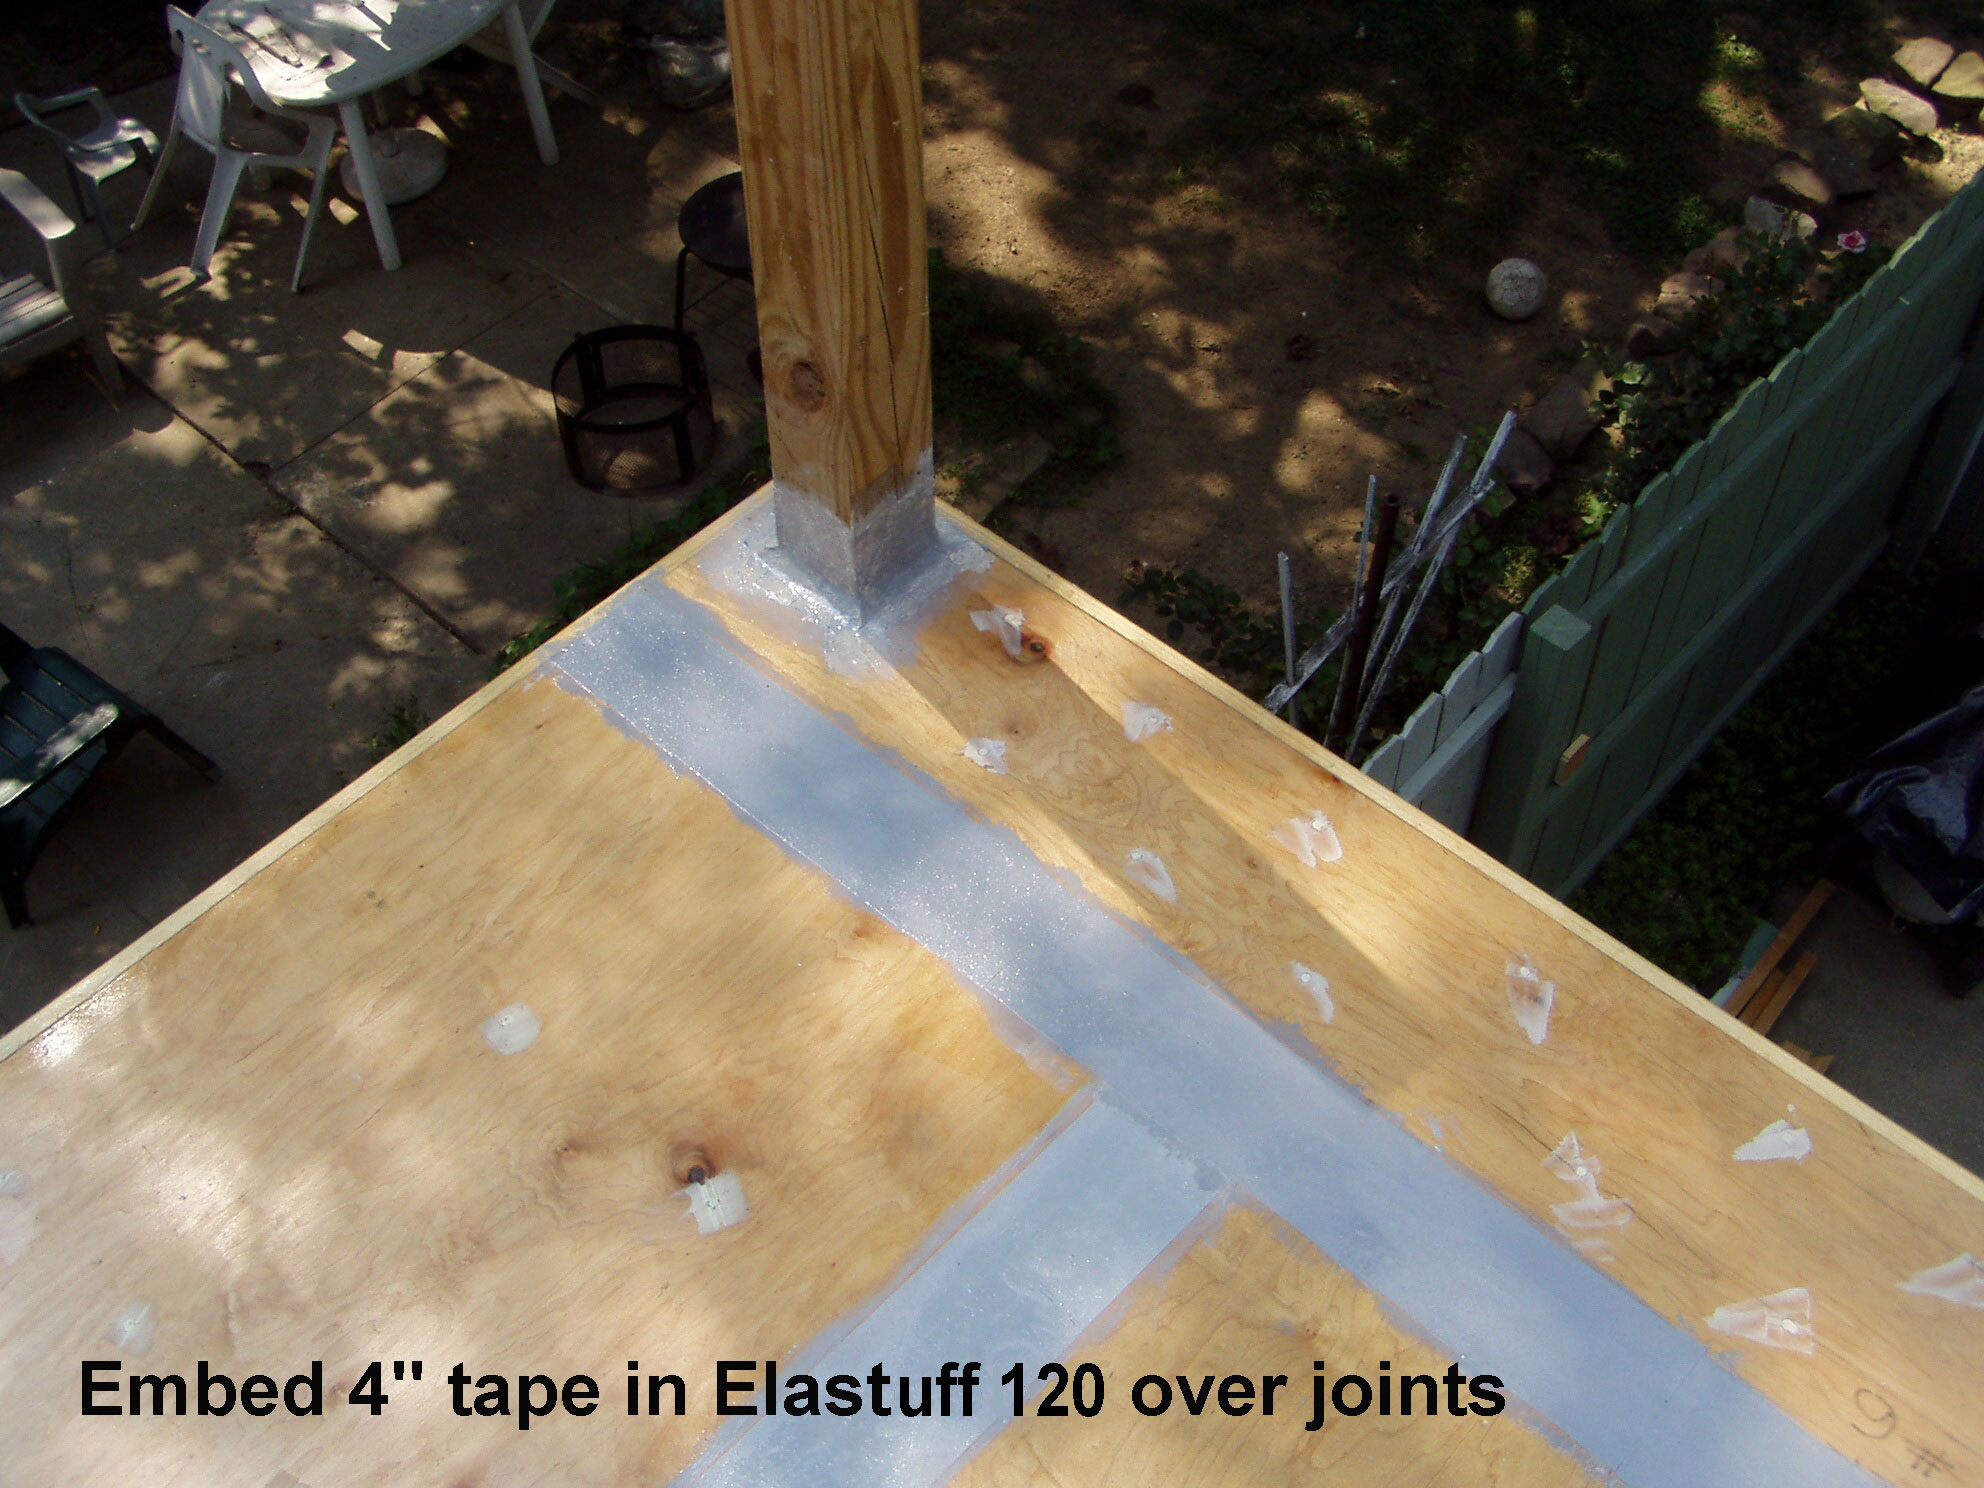 4 inch tape embeded in Elastuff 120 at joints